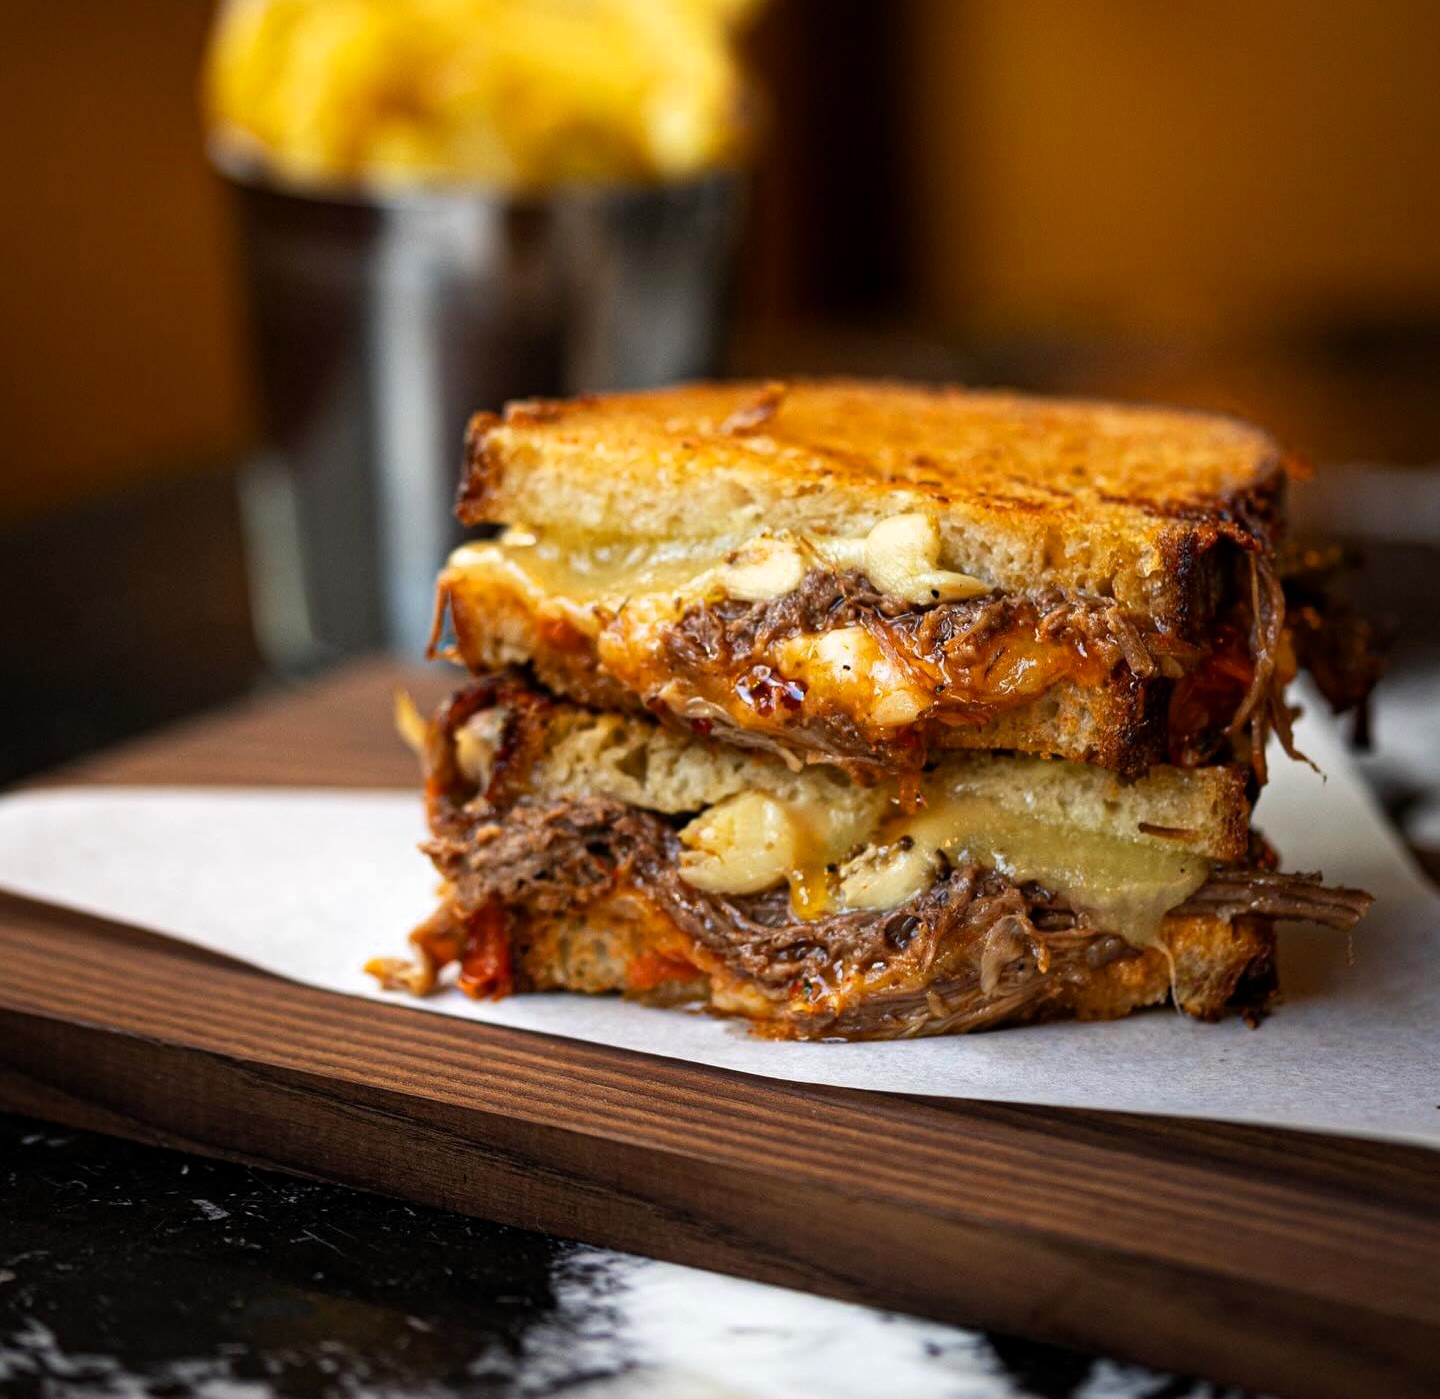 Gordon Ramsay offers an 'idiot sandwich' for £24, complete with braised short rib, cheddar, confit mushrooms, and spiced tomato chutney on sourdough. Mixed reactions ensue.